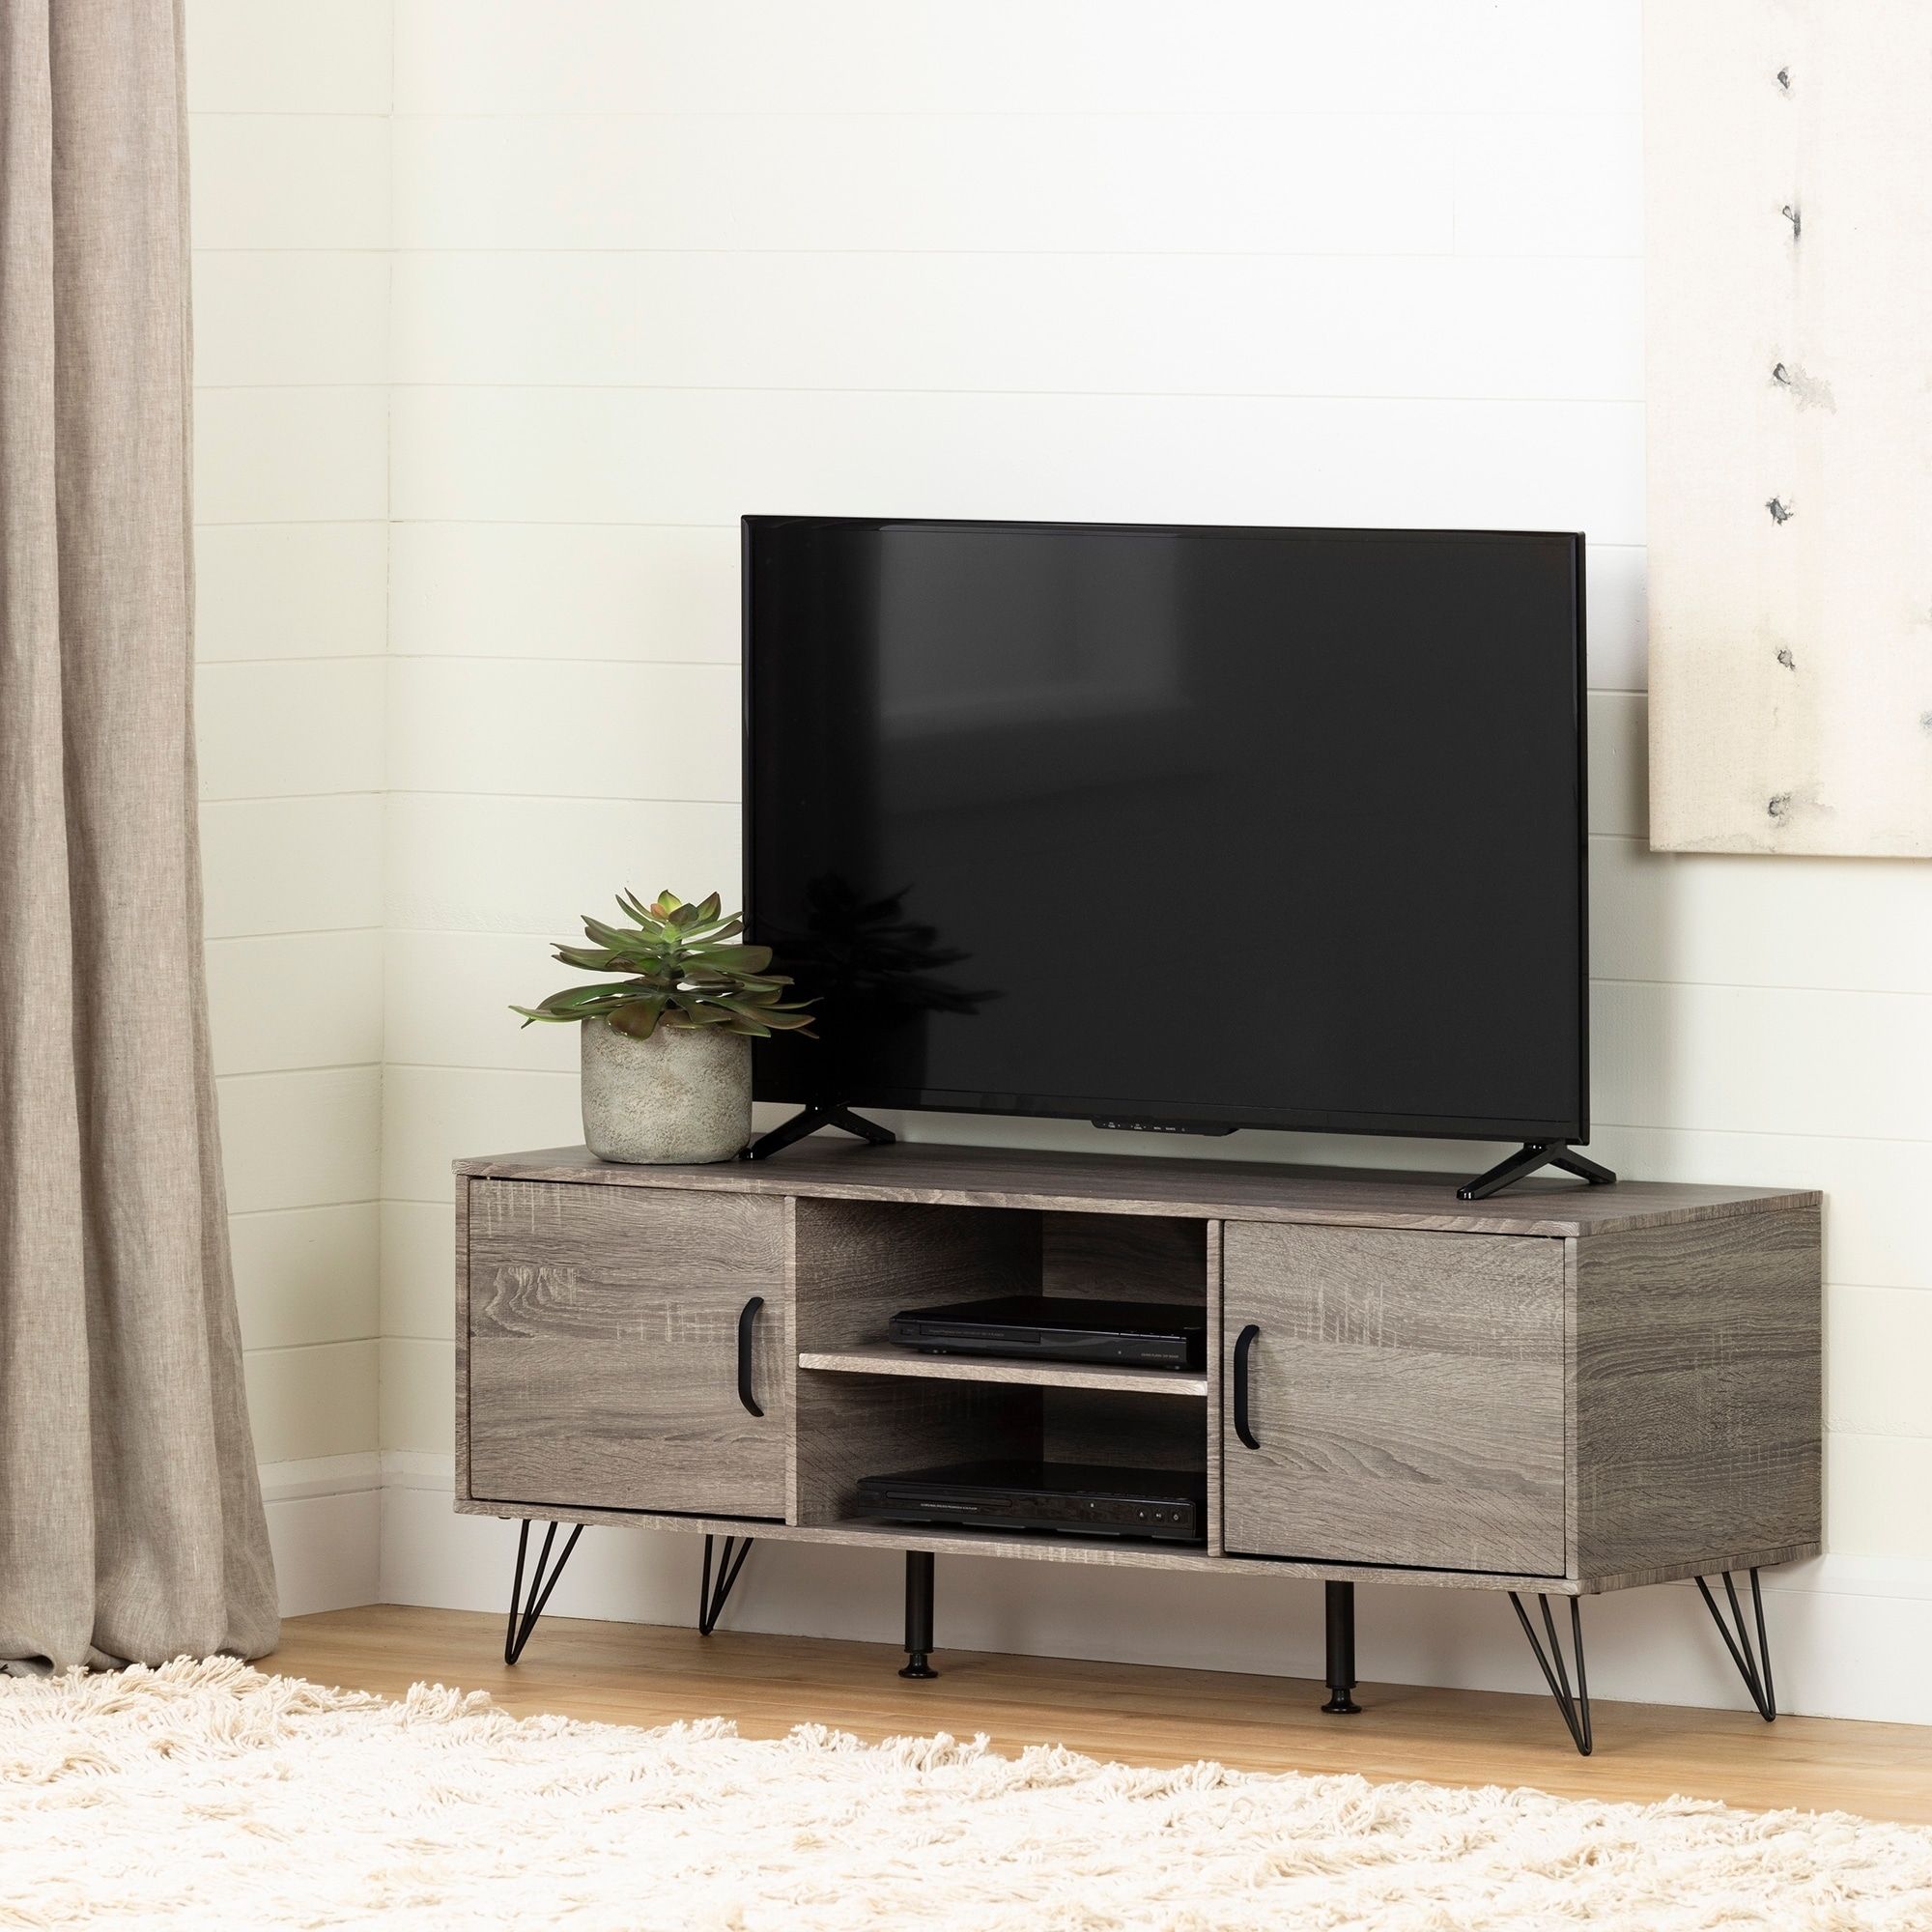 South Shore Evane Tv Stand With Doors For Tvs Up To 55 With Regard To South Shore Evane Tv Stands With Doors In Oak Camel (View 4 of 15)